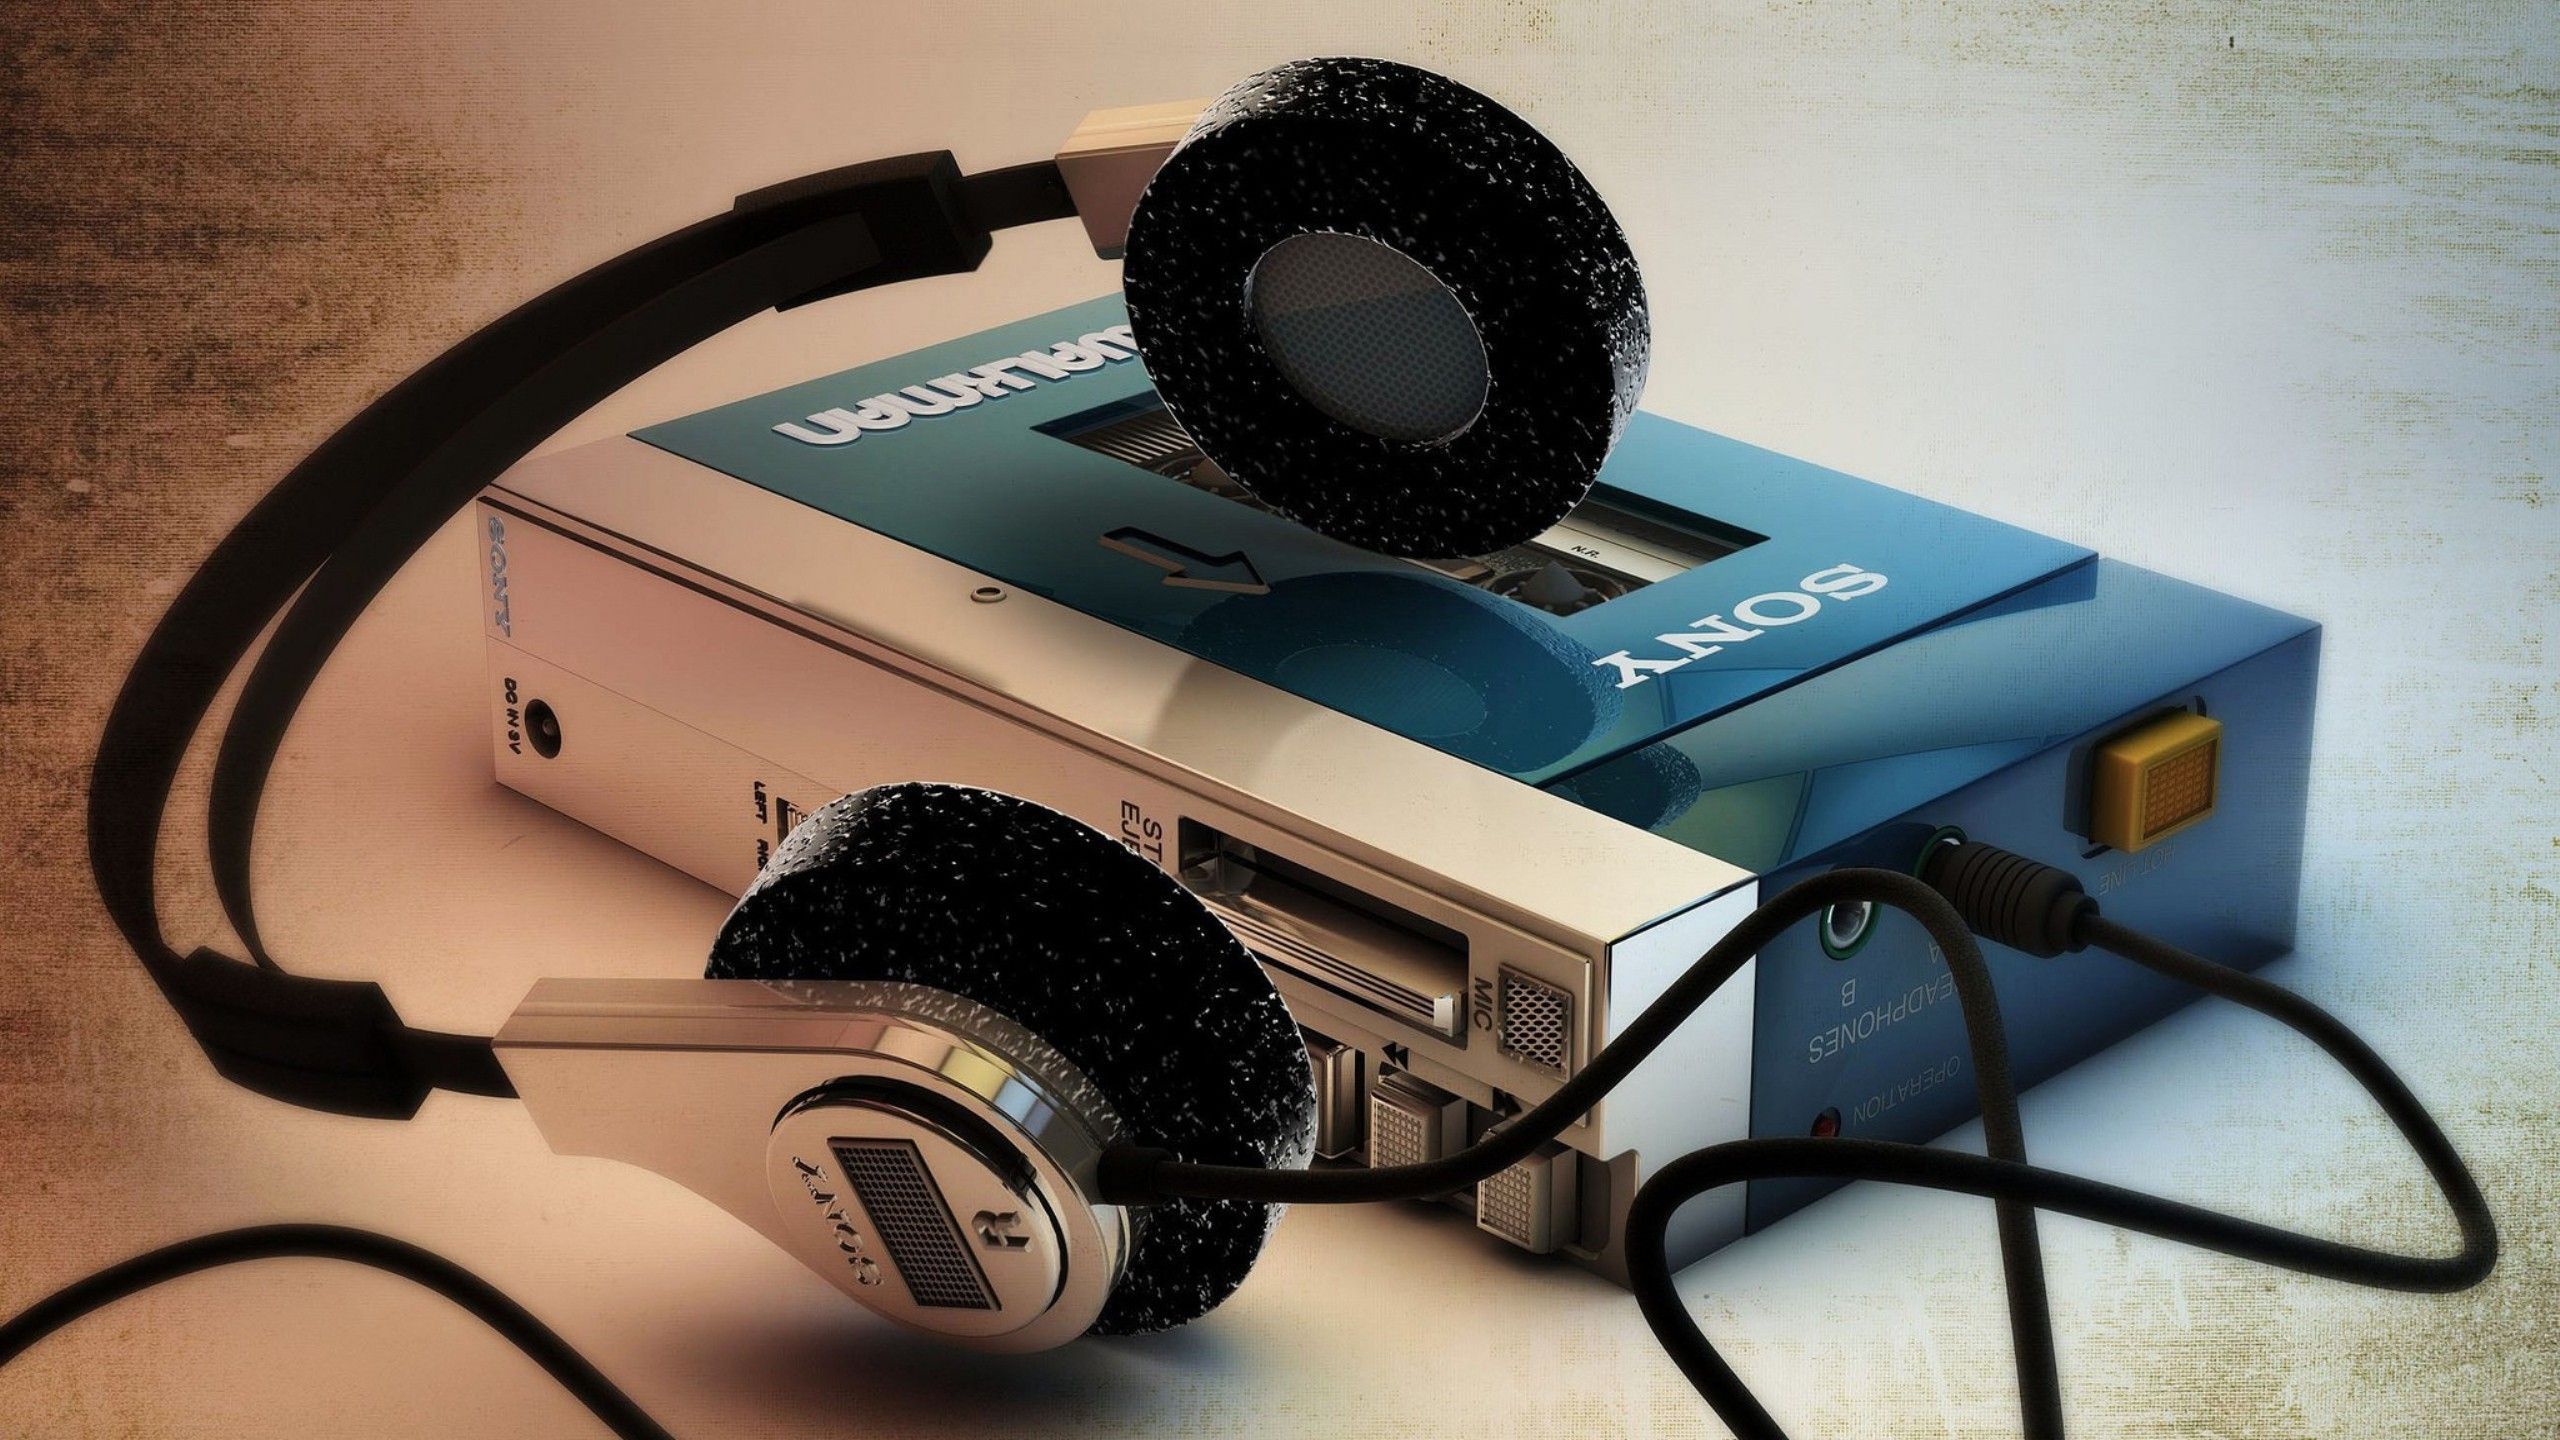 Strap in for Nostalgia – The History and Legacy of the Walkman